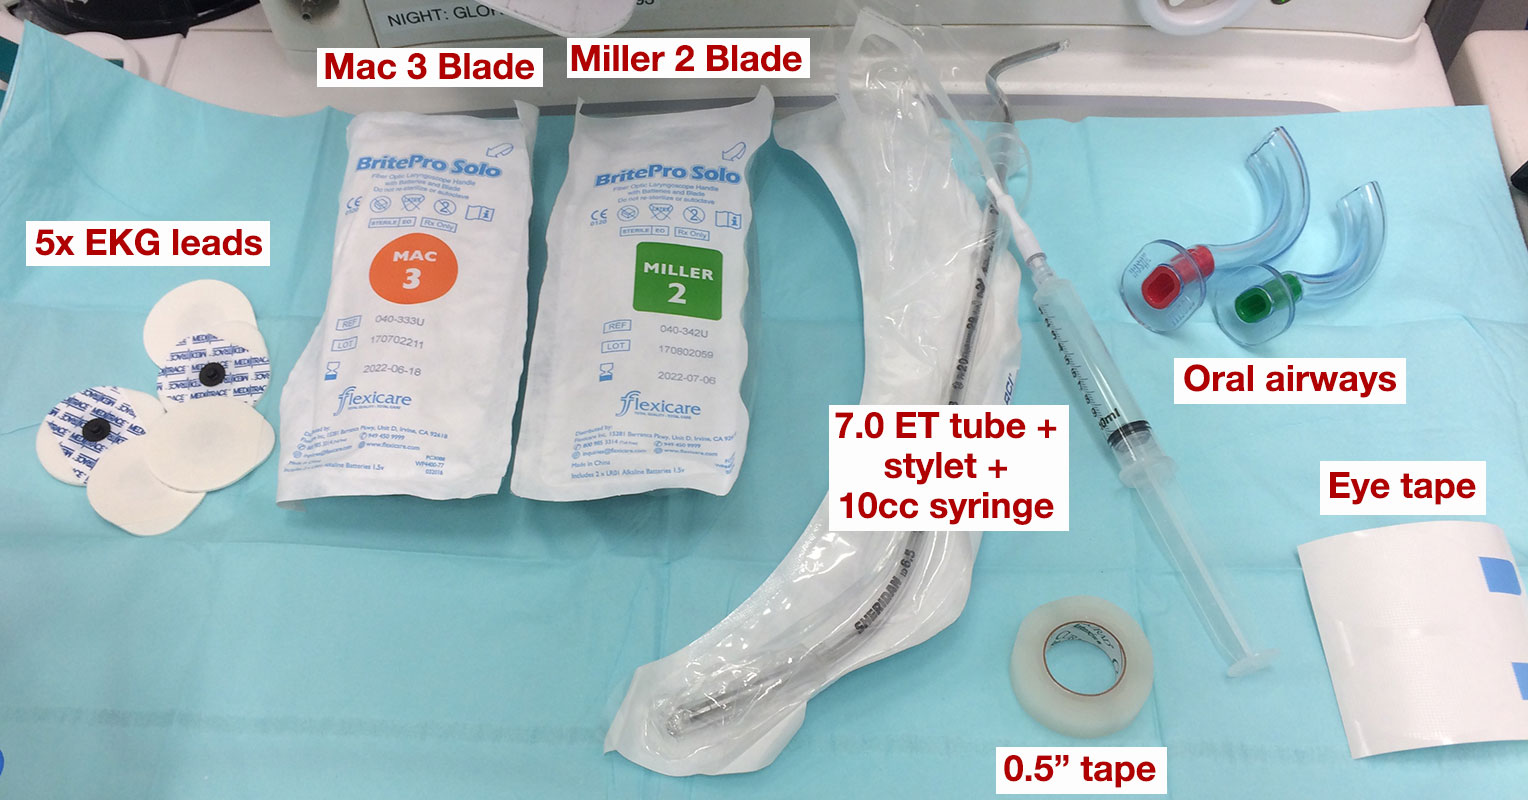 Intubation-supplies-labeled